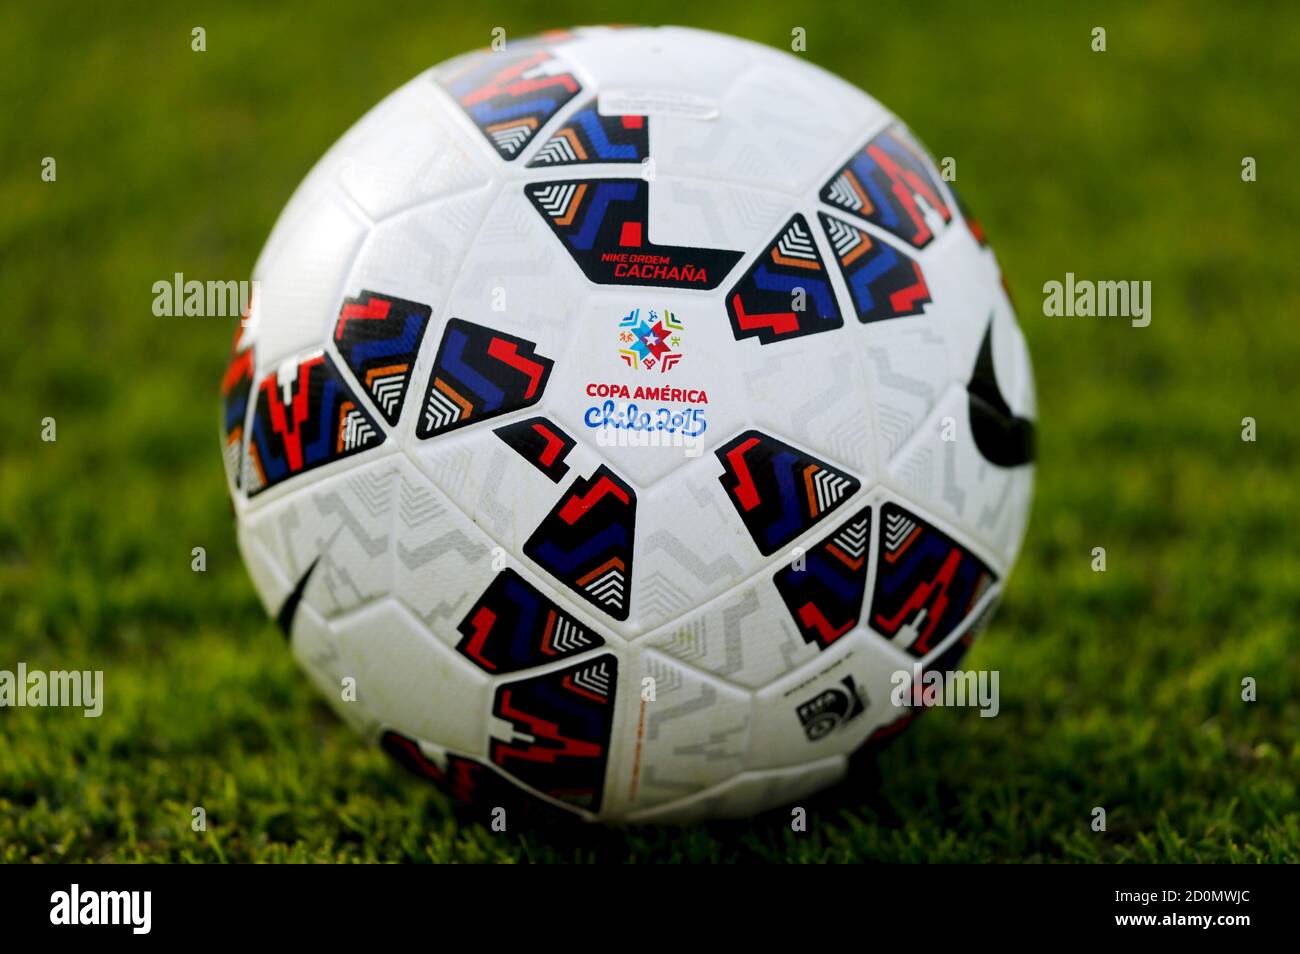 The Nike Cachana, the official soccer ball for Chile's 2015 Copa America,  is seen during Argentina's team training session in Buenos Aires,  Argentina, June 1, 2015. REUTERS/Marcos Brindicci Stock Photo - Alamy